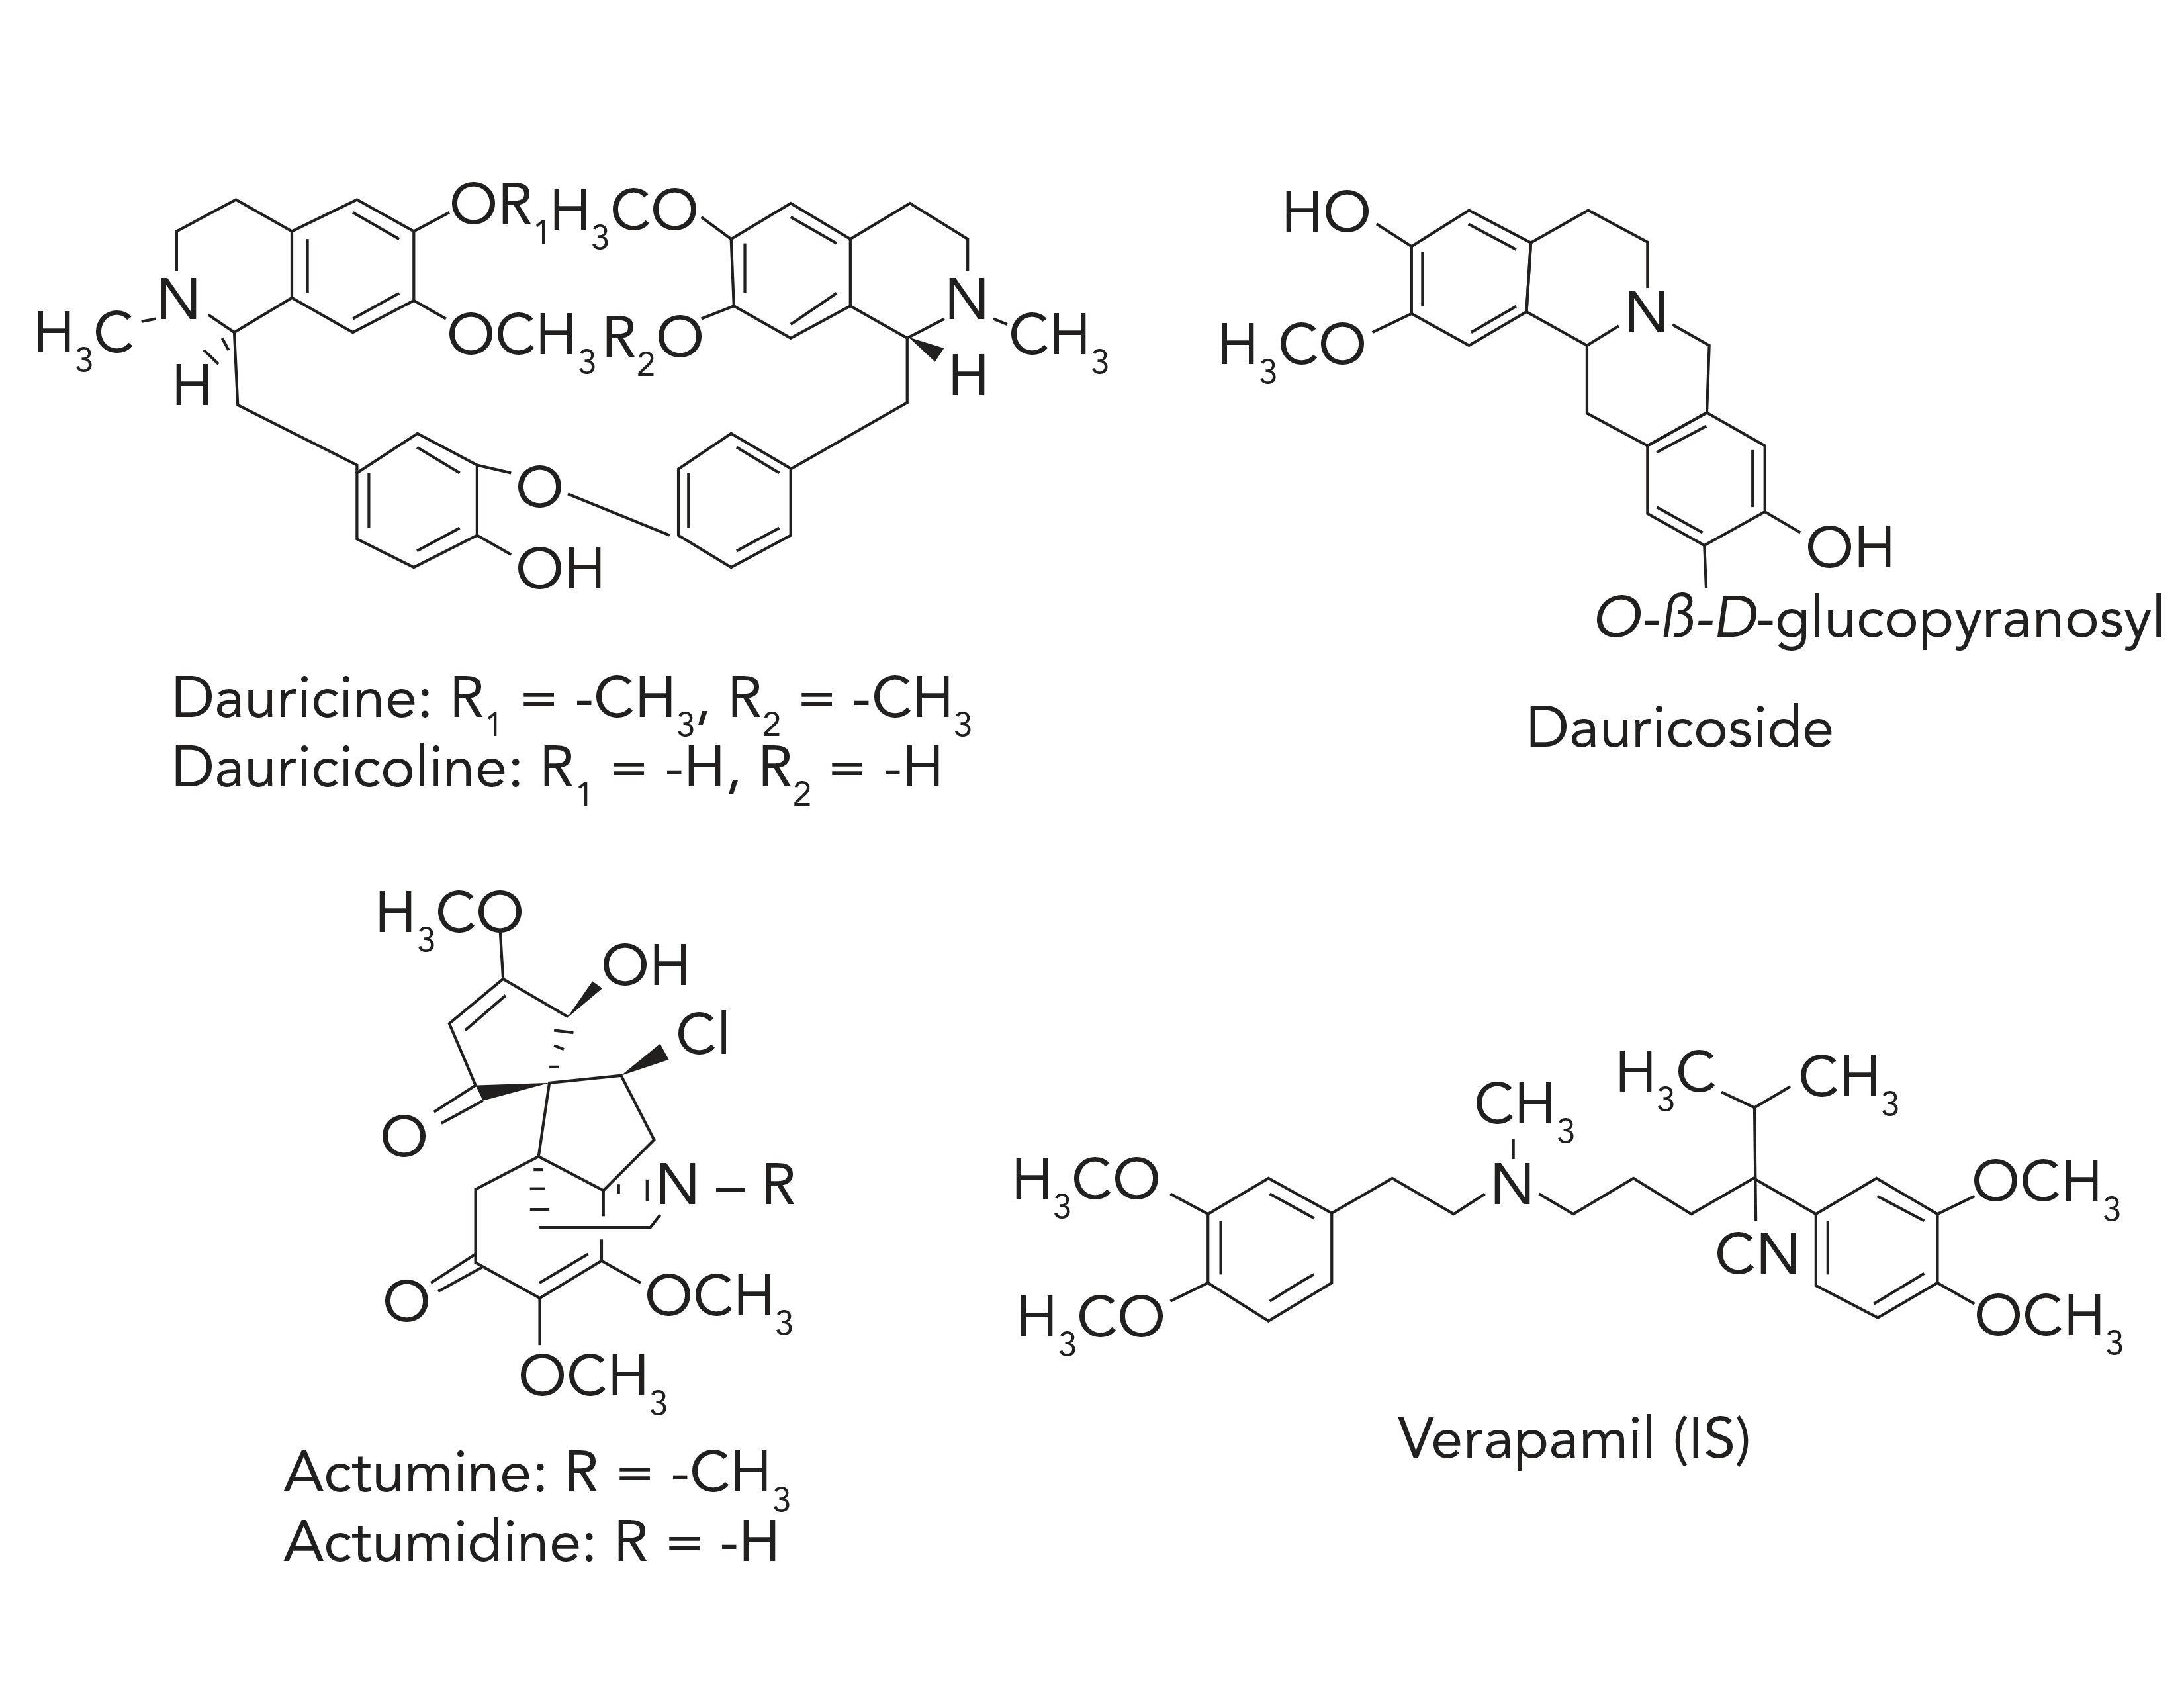 FIGURE 1: The chemical structures of the five active alkaloids and the IS.